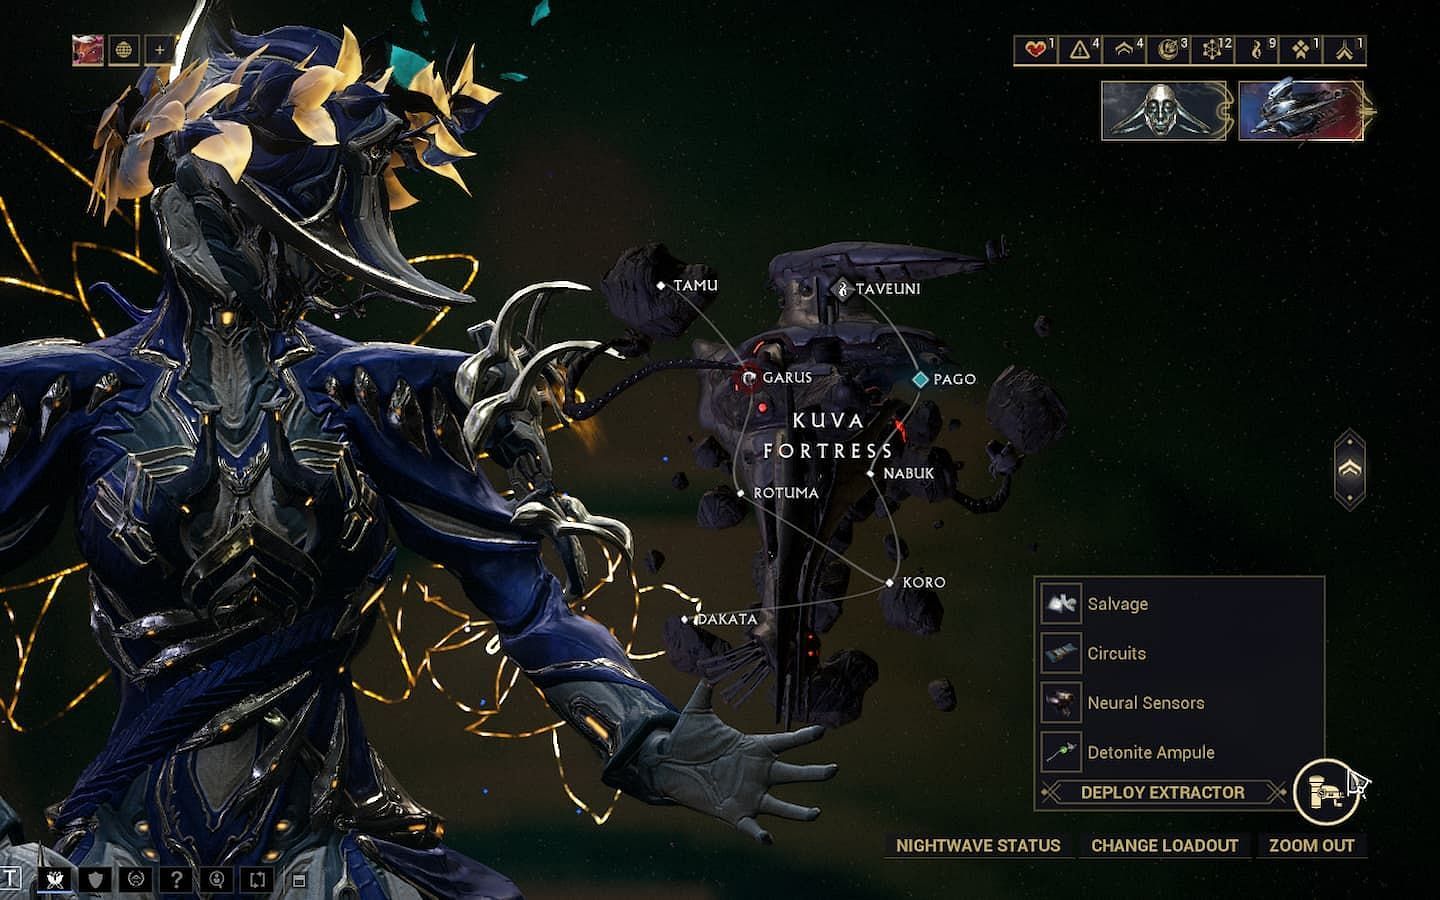 Kuva Fortress is a late-game source of Neural Sensors (Image via Digital Extremes)